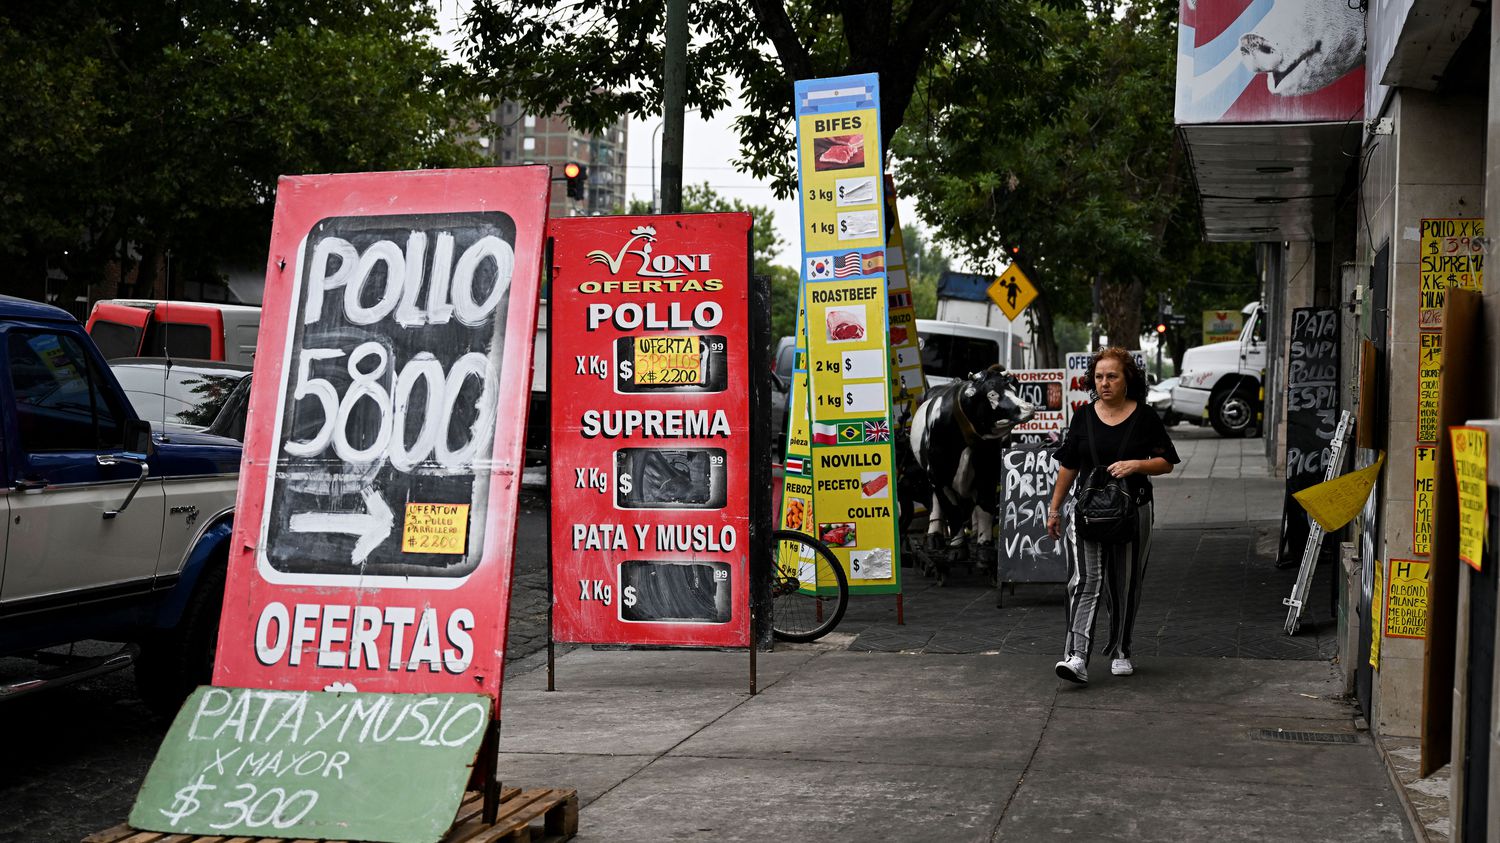 Argentina: Inflation hits 94.8% in 2022, unheard of since 1991
